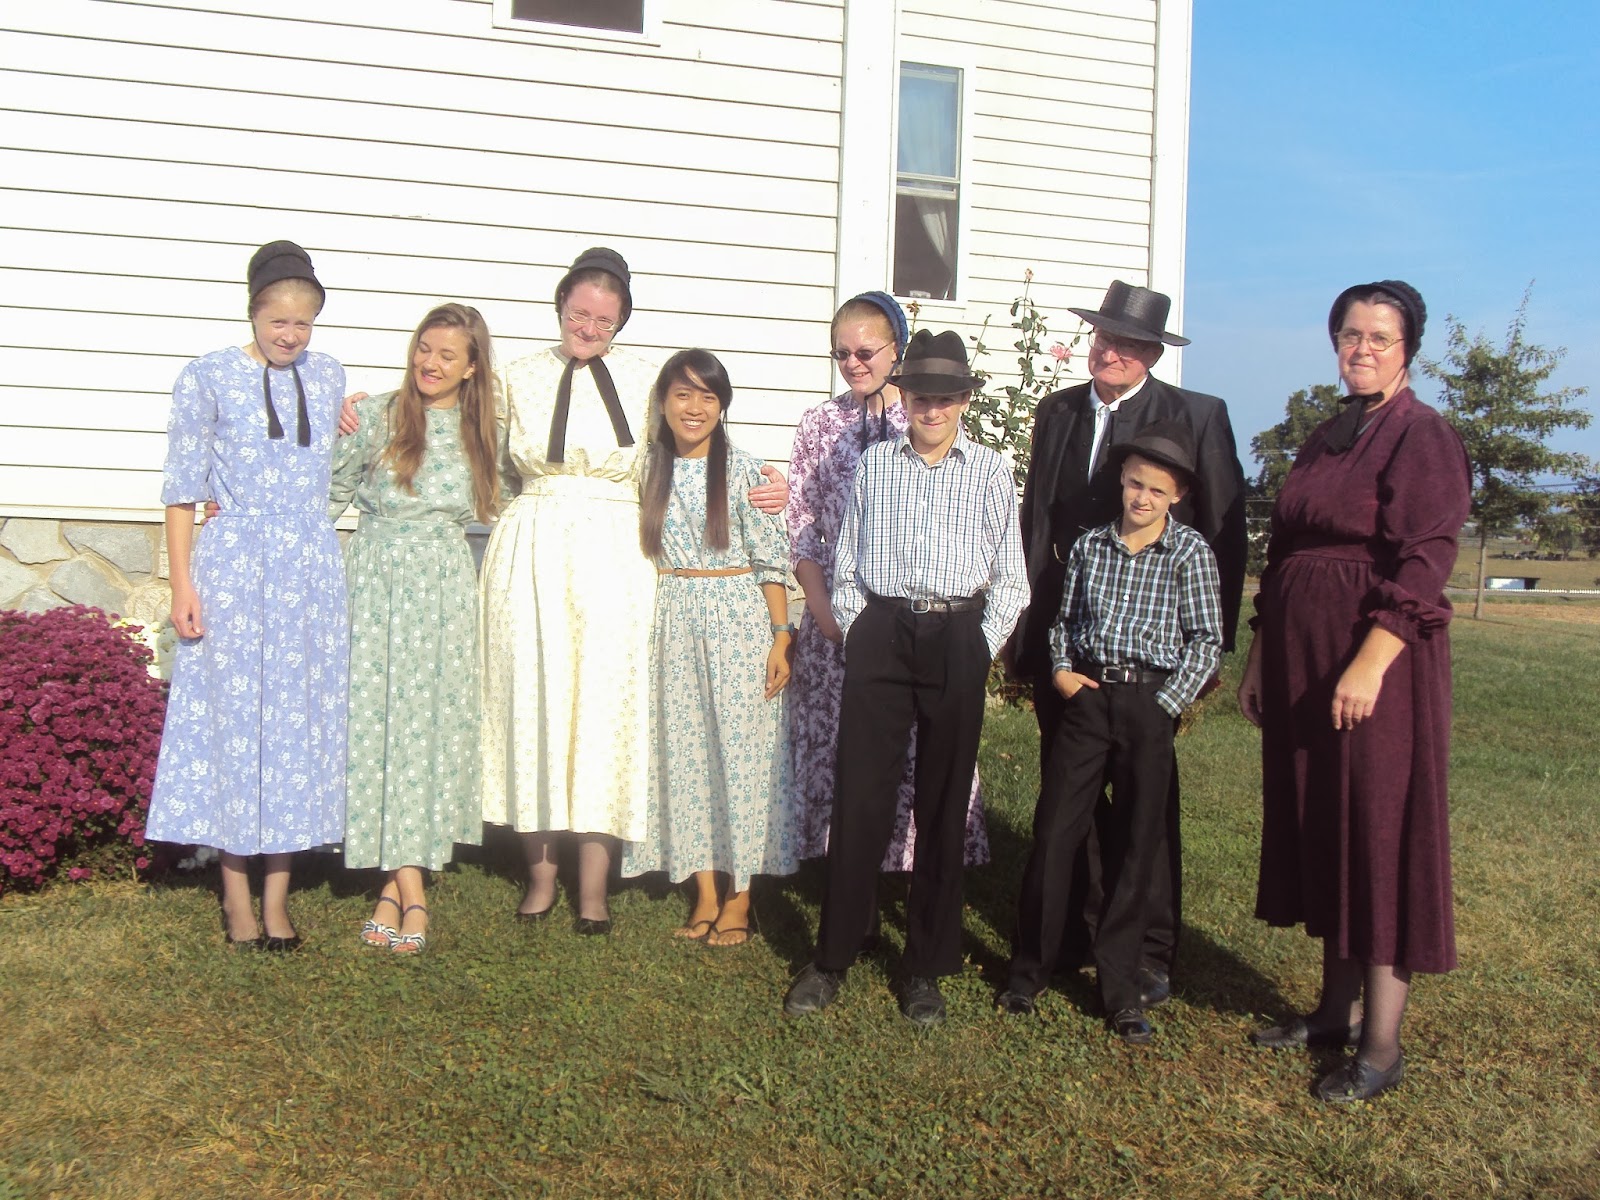 For the last appointment, a Mennonite family. 